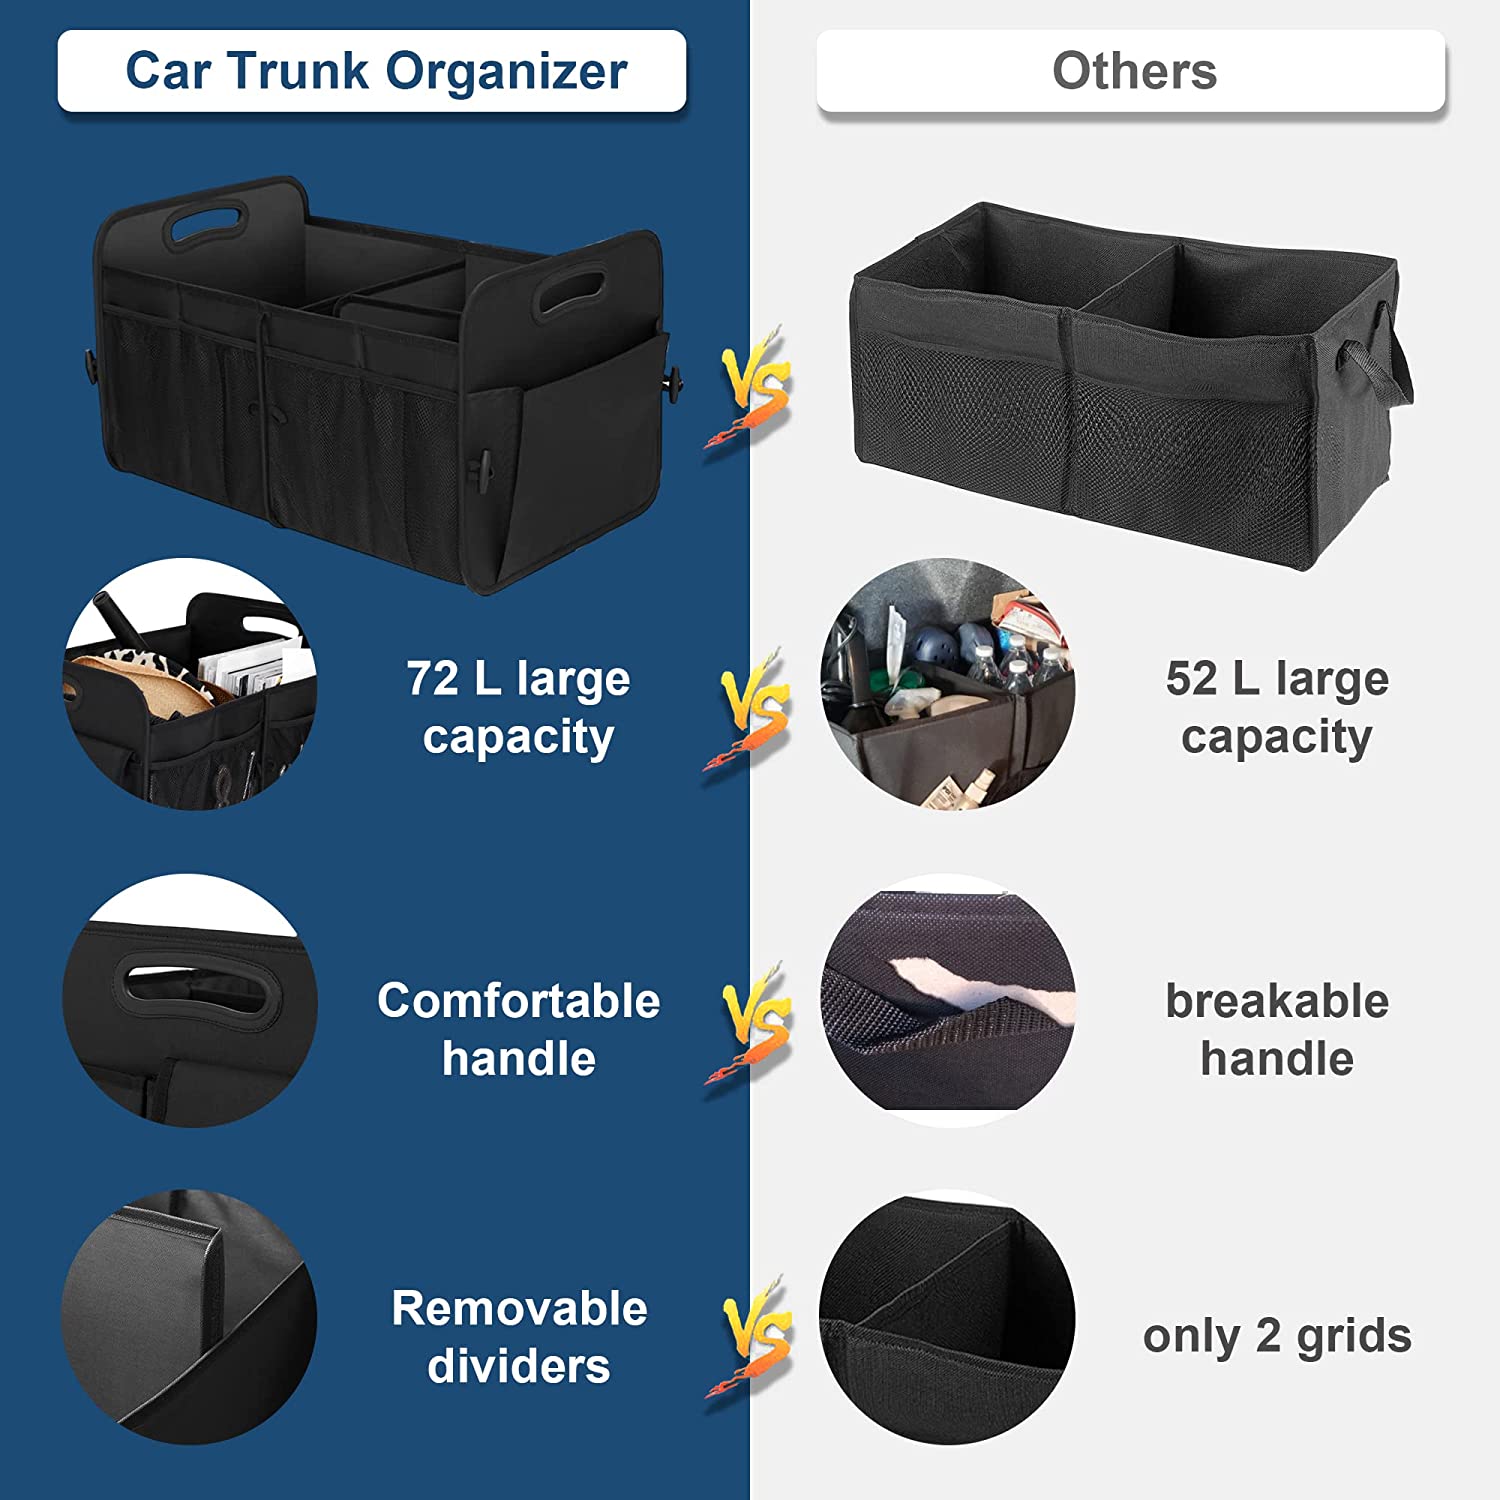 Car Trunk Organizer,Car Storage Organizer with 72L Large Capacity Waterproof Collapsible and 11 Pockets, Trunk Organizer for Car Suv/Jeep/Sedan - Delicate Leather